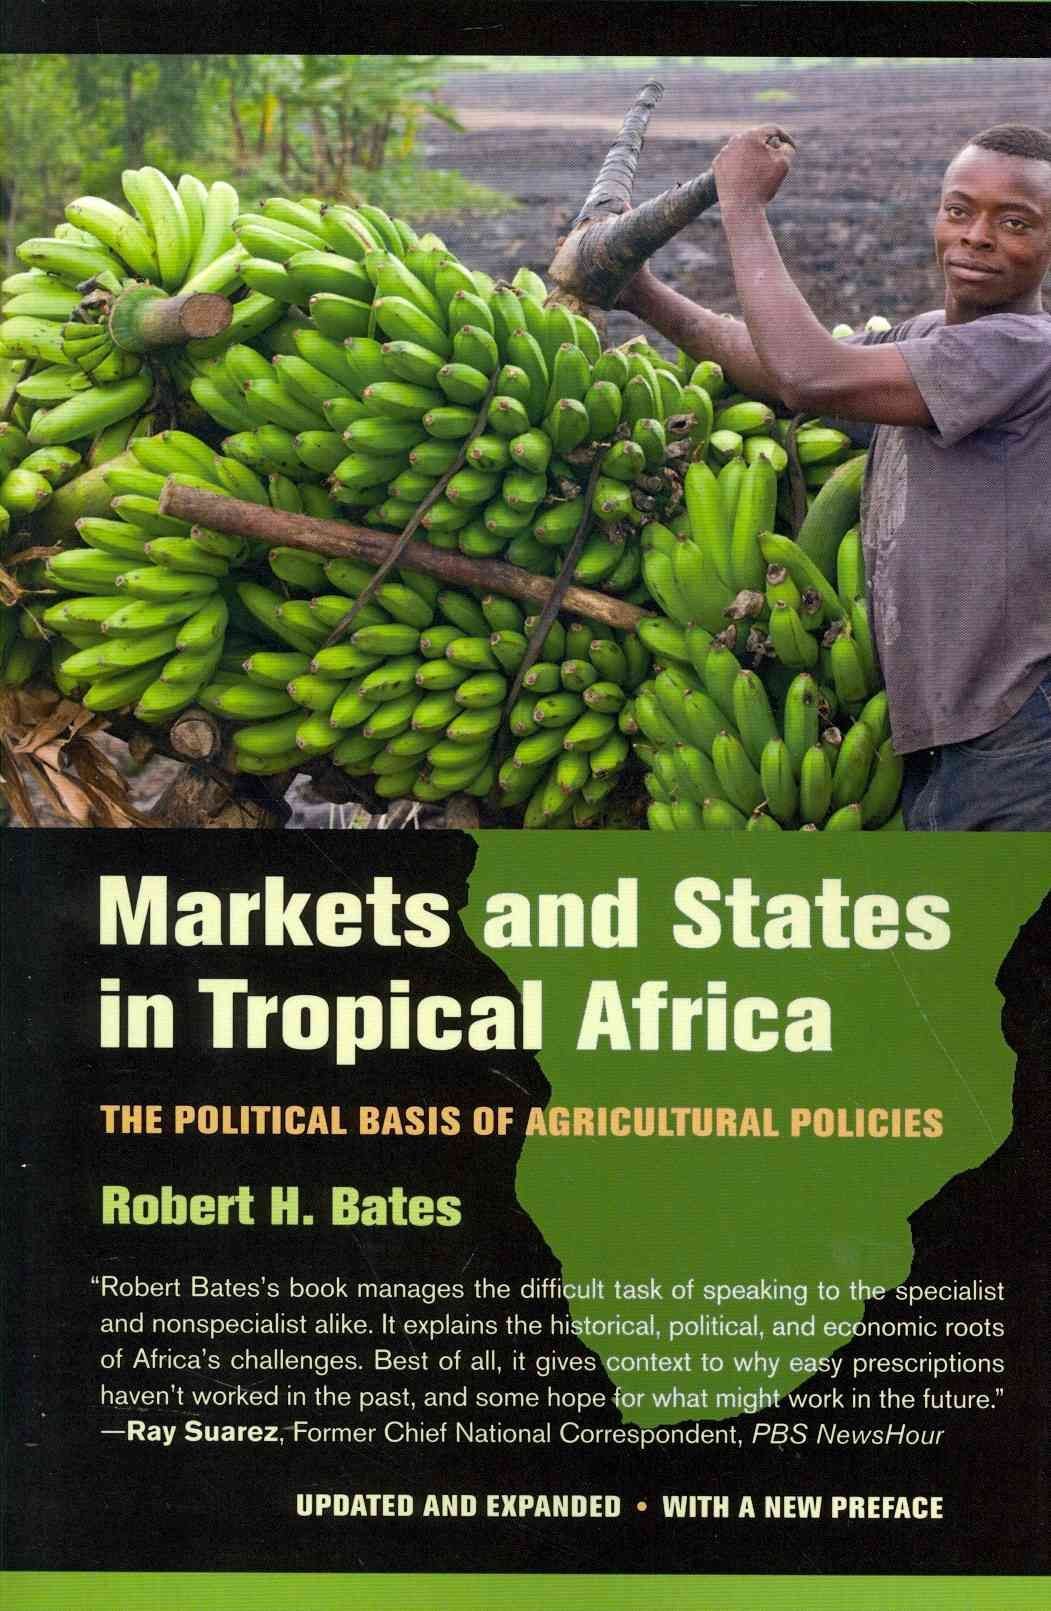 Markets and States in Tropical Africa